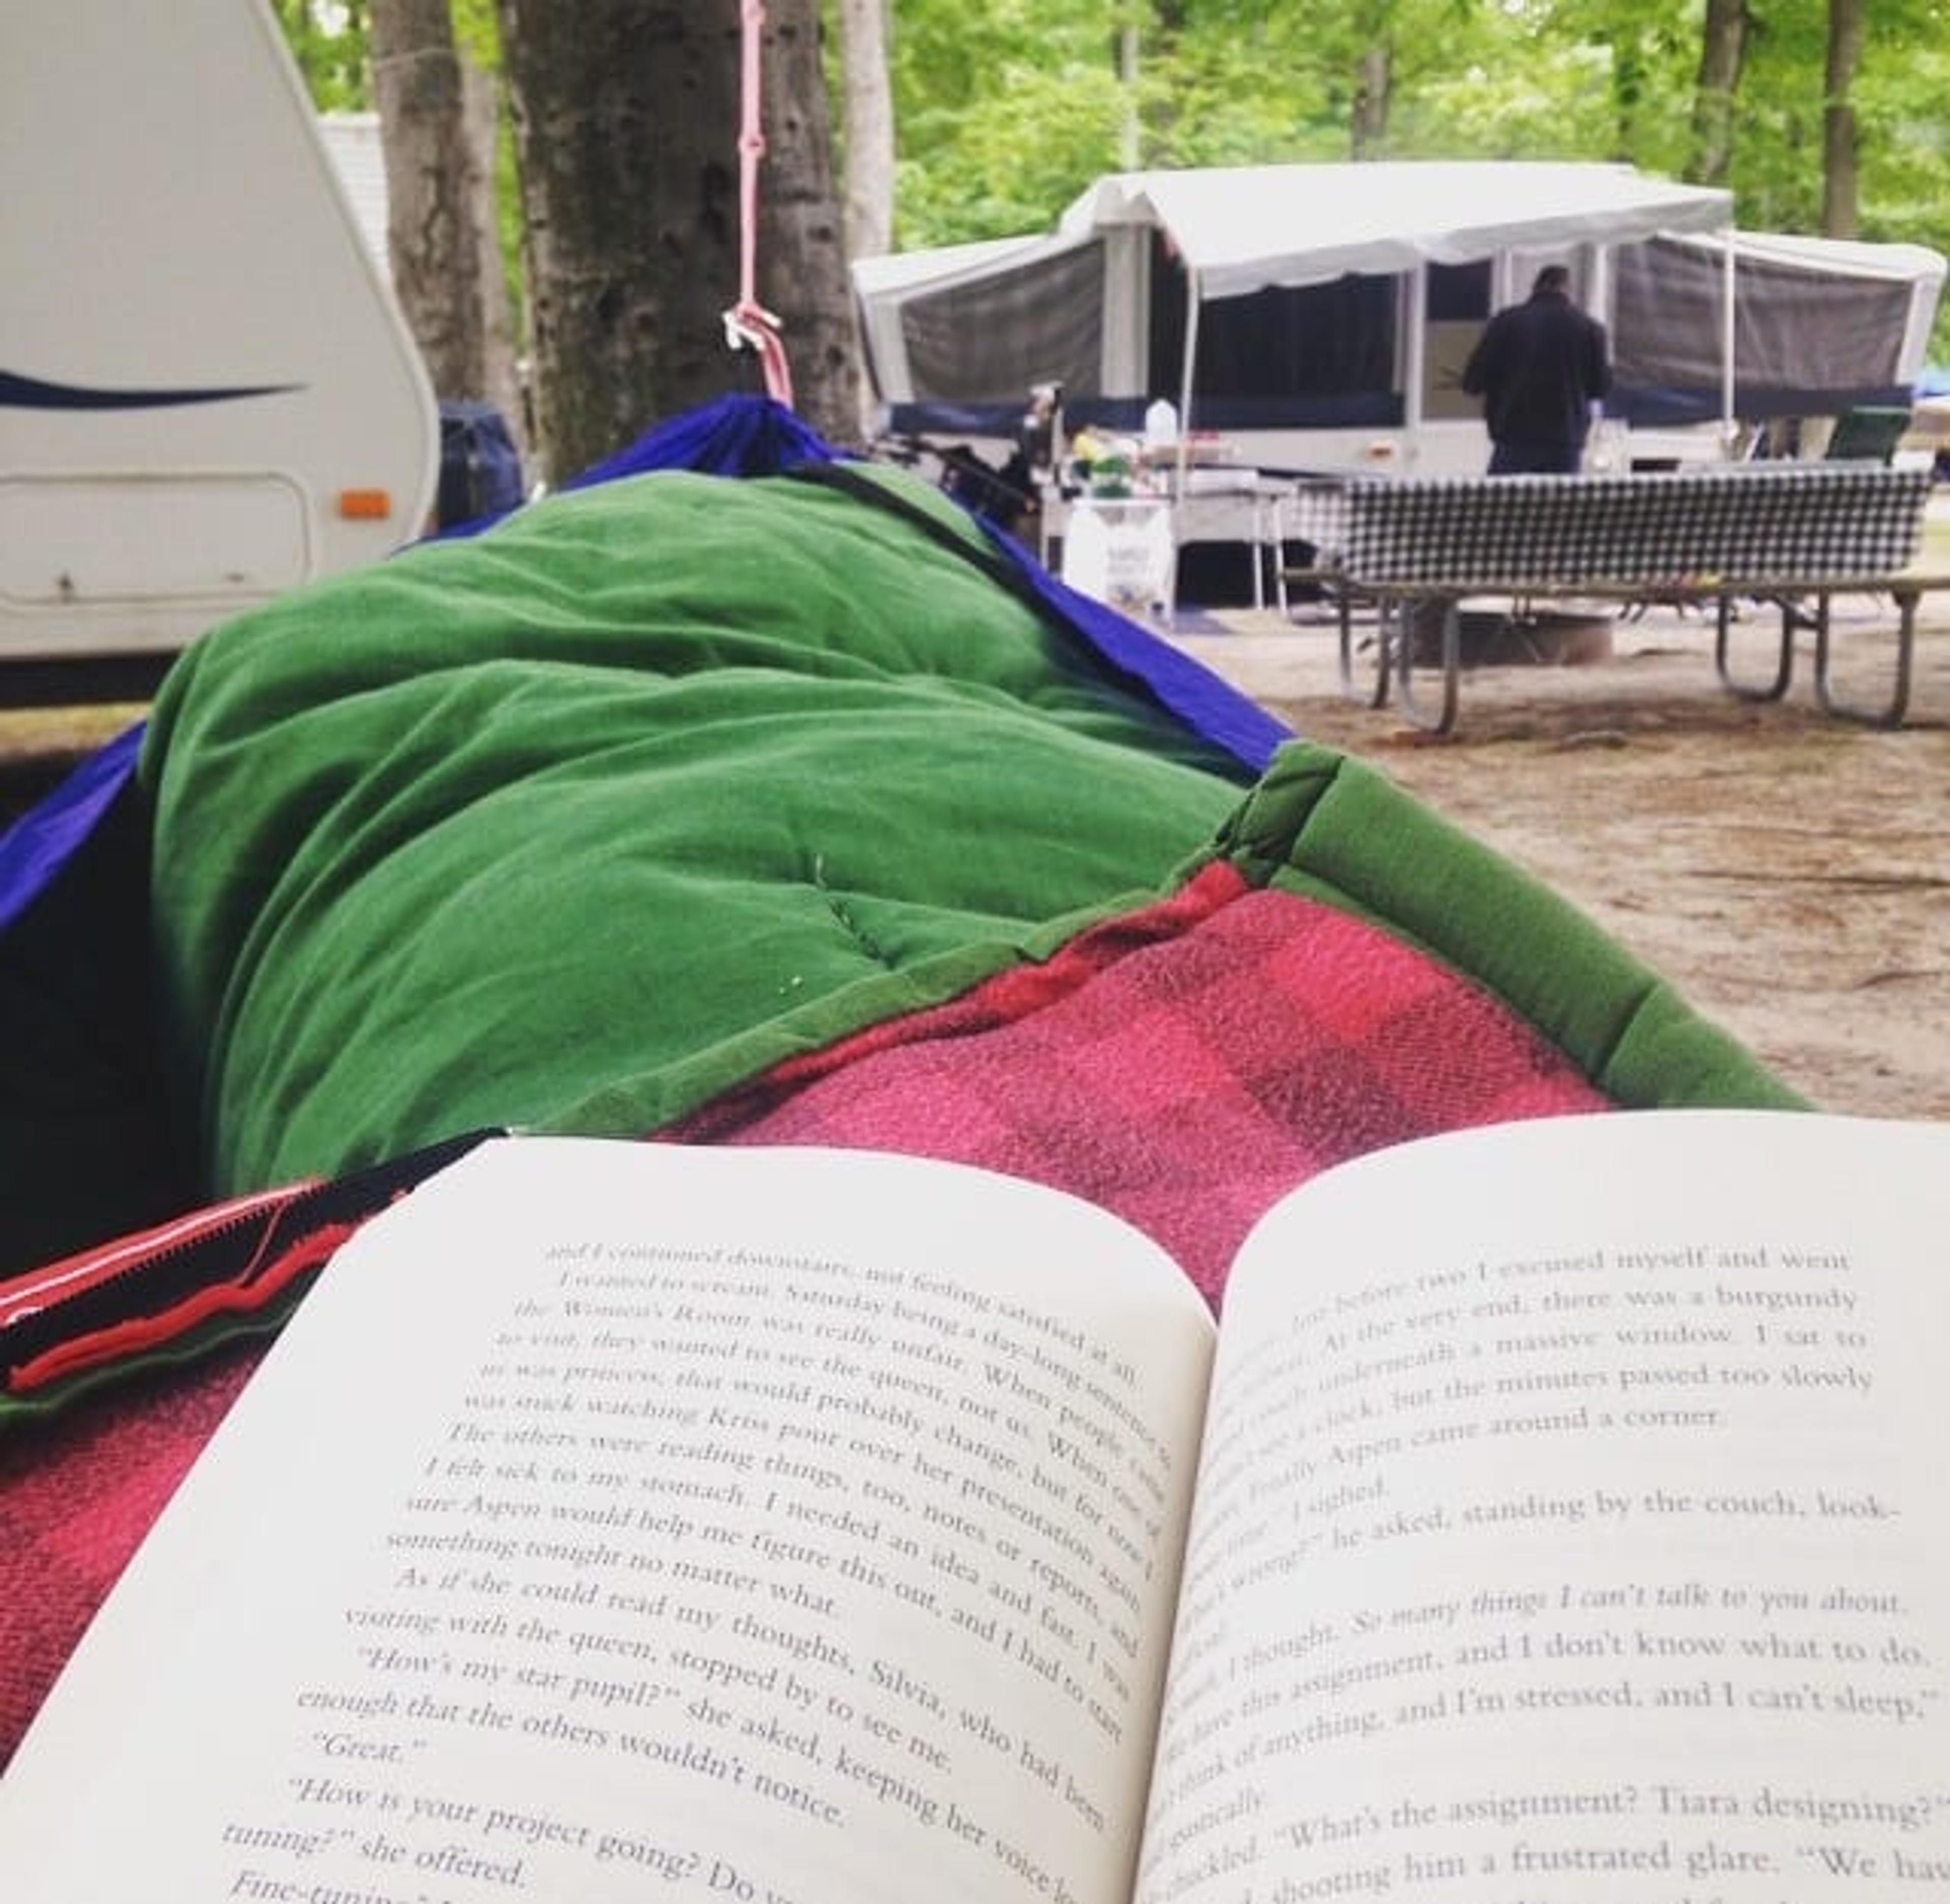 Hammocks can be the perfect place to read, relax while camping.